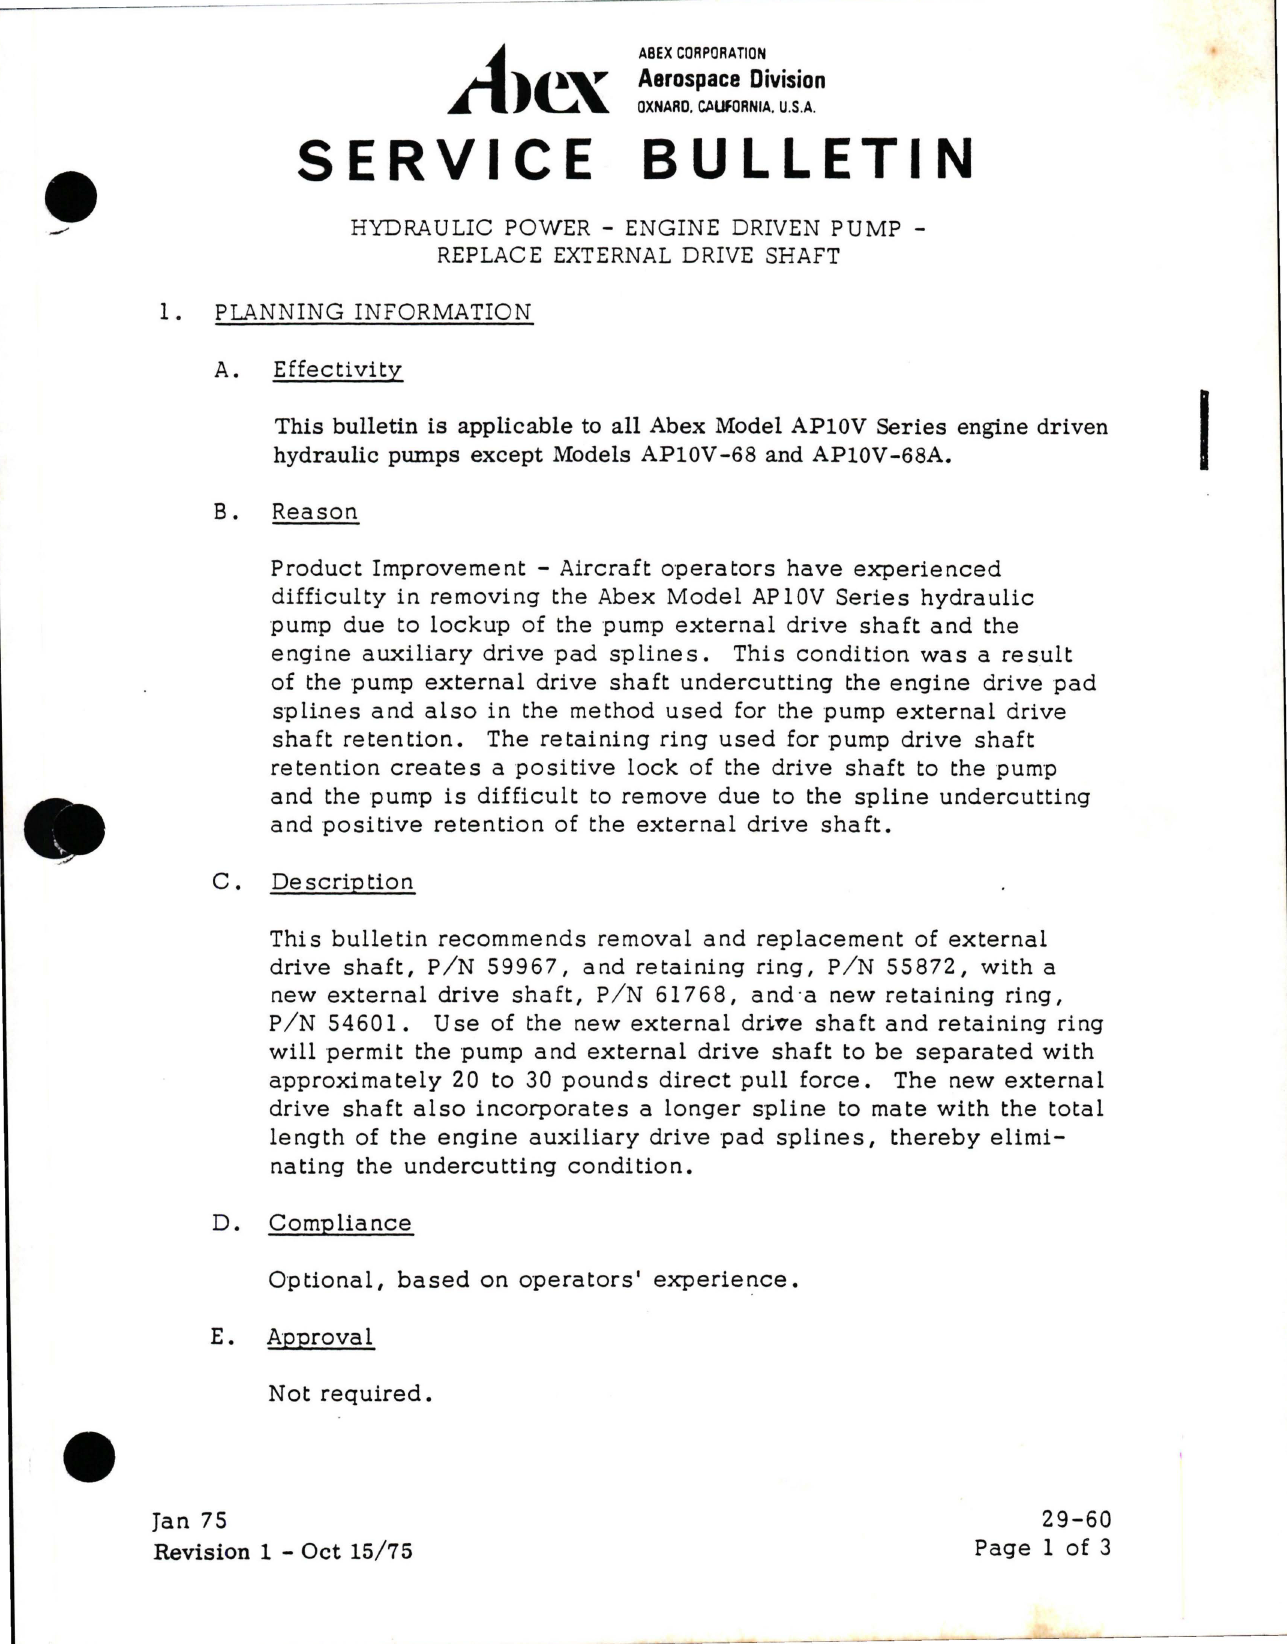 Sample page 1 from AirCorps Library document: Replace External Drive Shaft for Hydraulic Pump